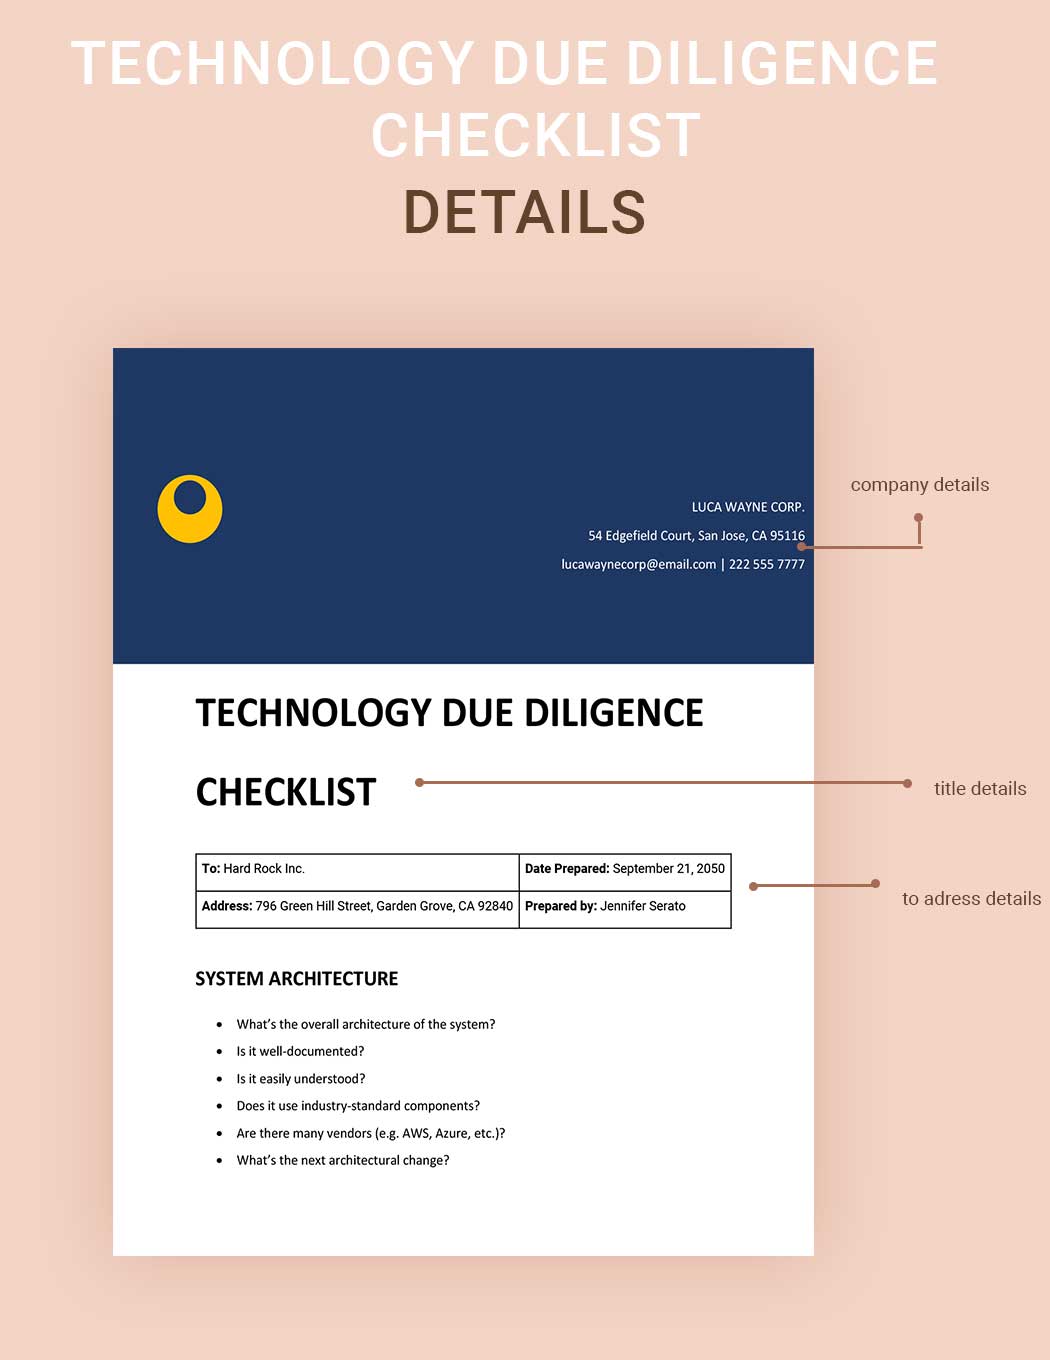 Technology Due Diligence Checklist